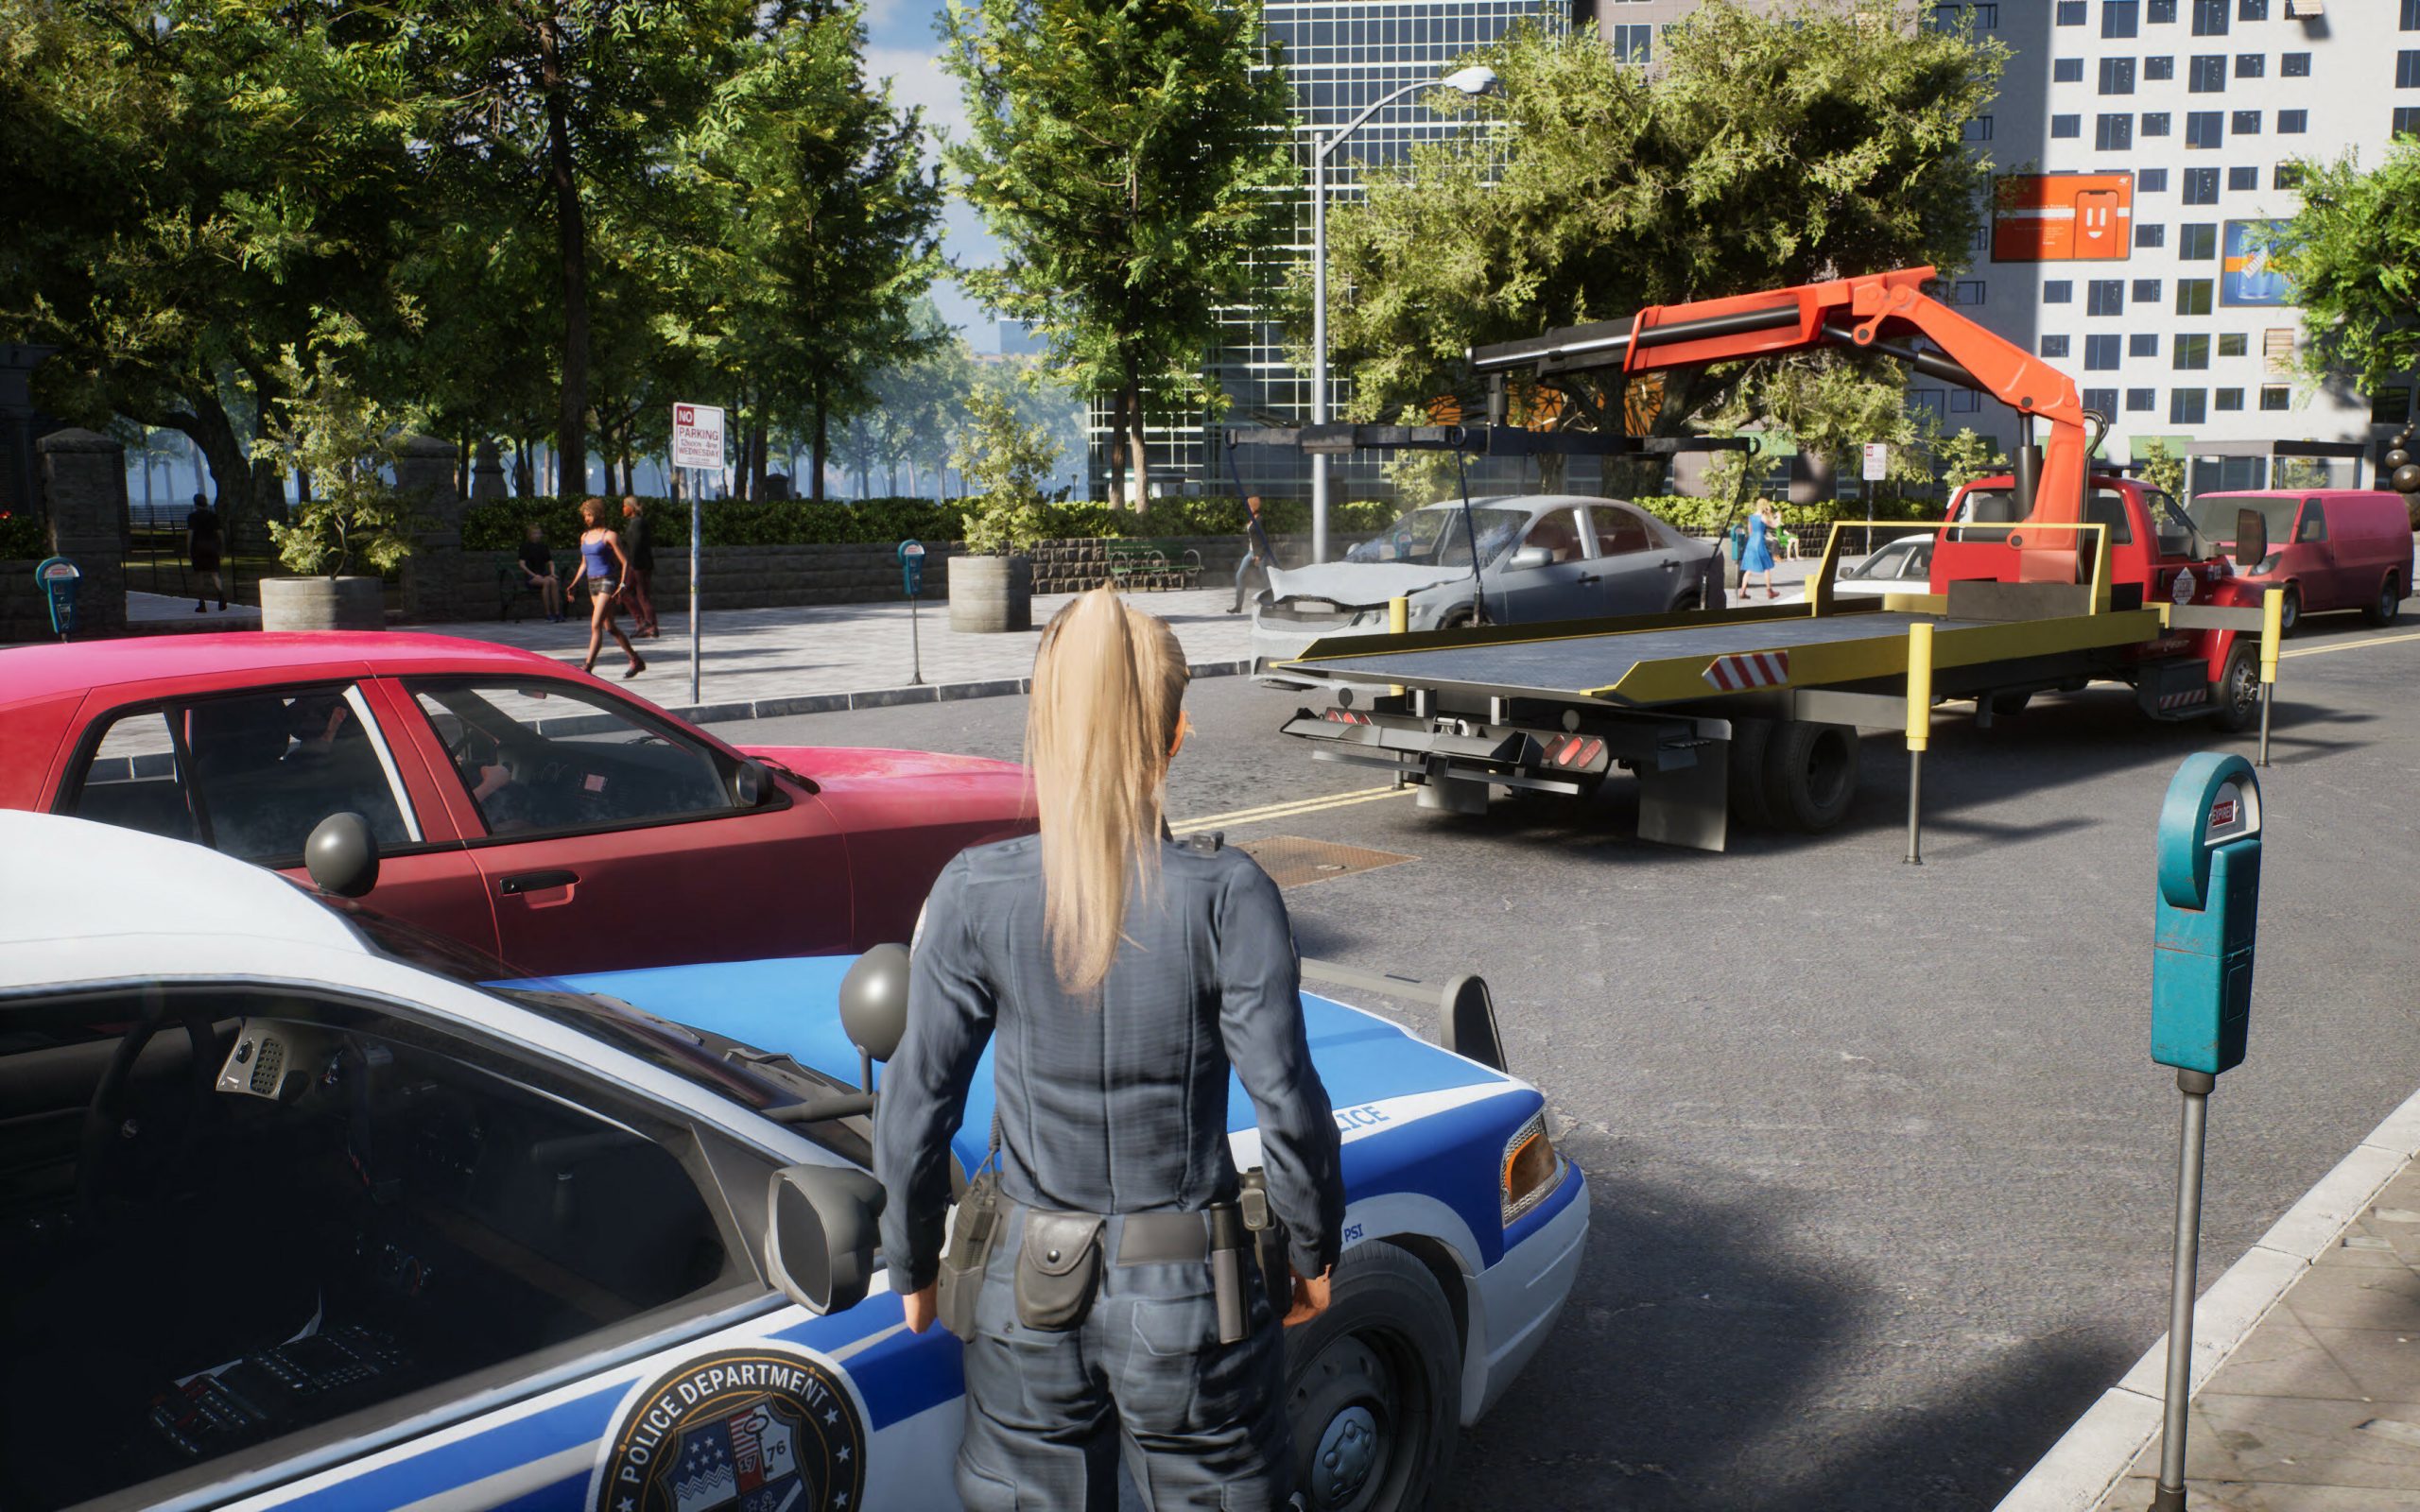 Police Simulator is "GTA coupled with law enforcement."  The German game surprises with high ratings and sales